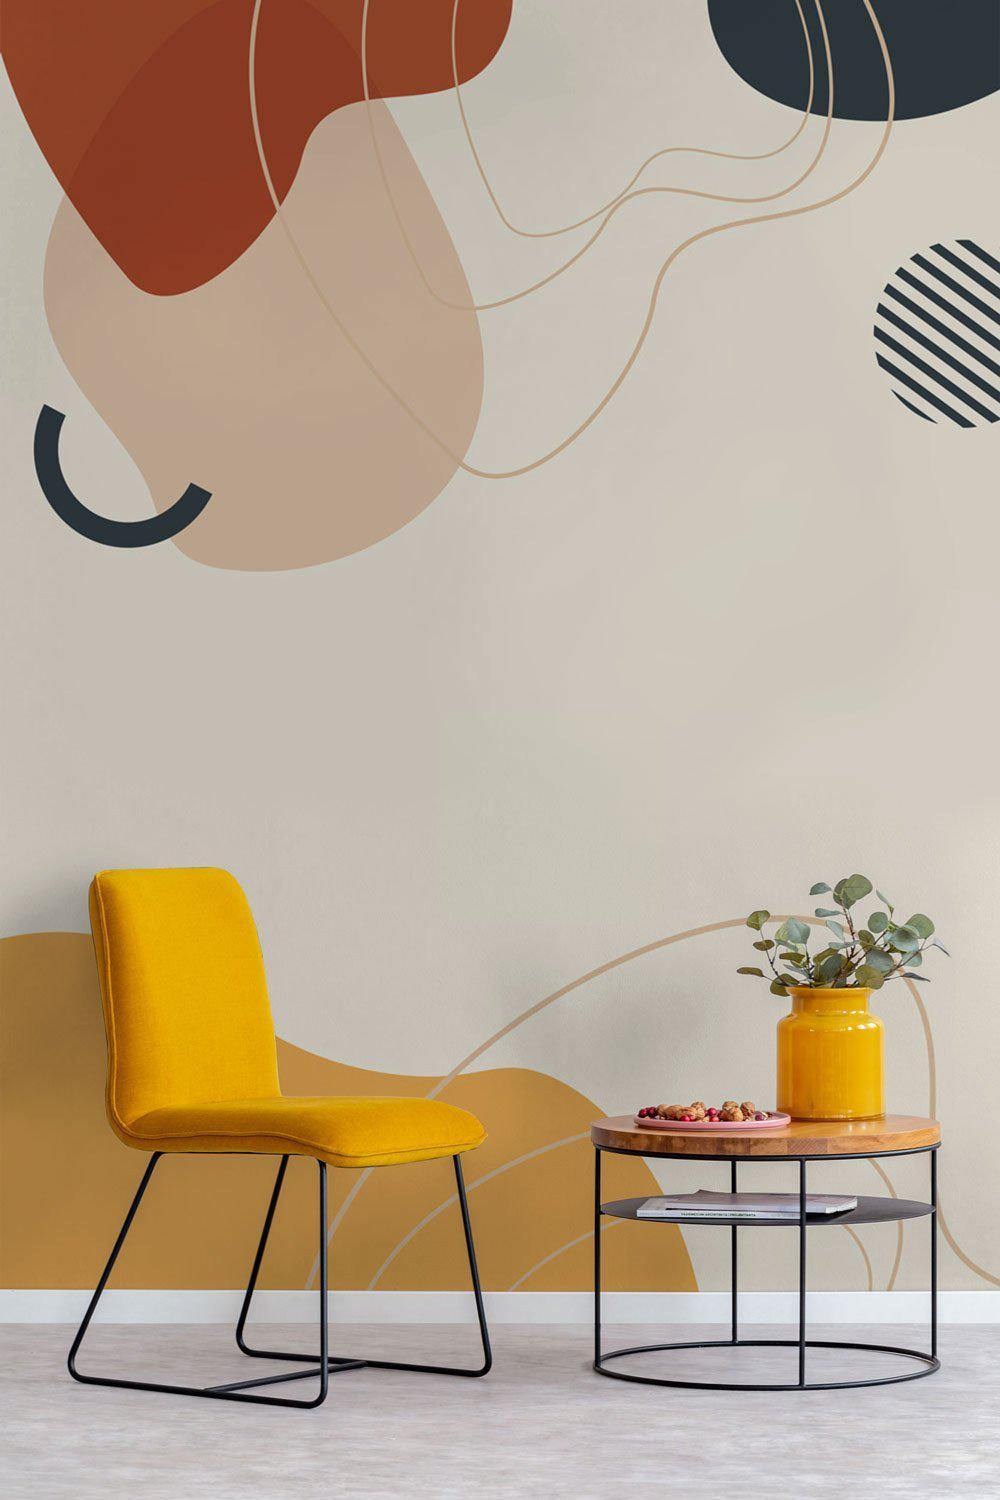 Primary colors wall mural